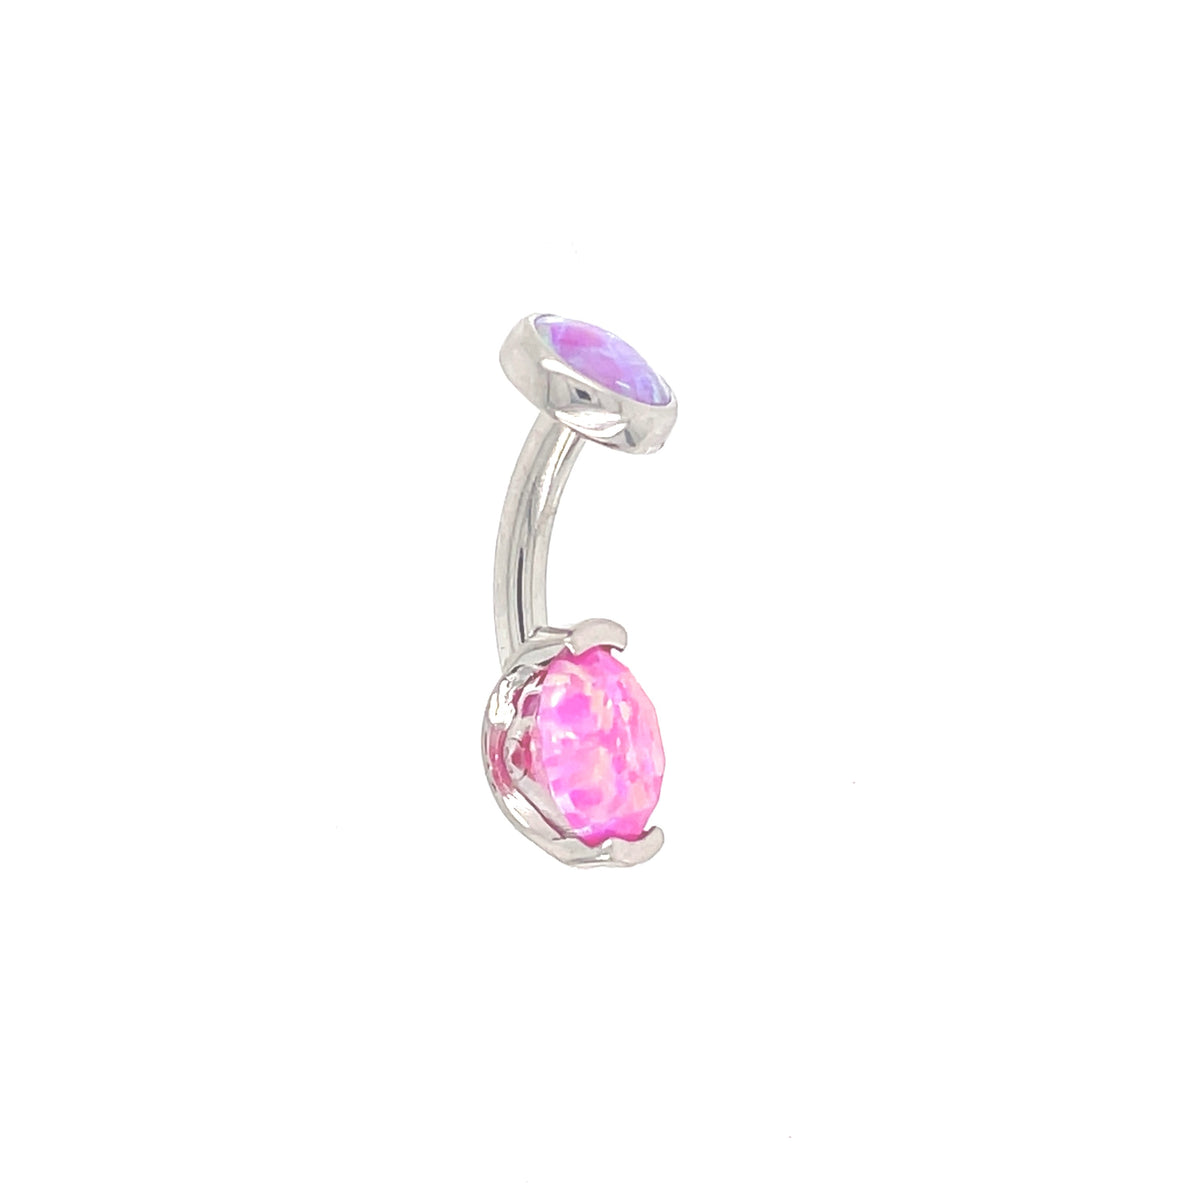 Industrial Strength Titanium Lavender &amp; Faceted Magenta Opal Curved Barbell